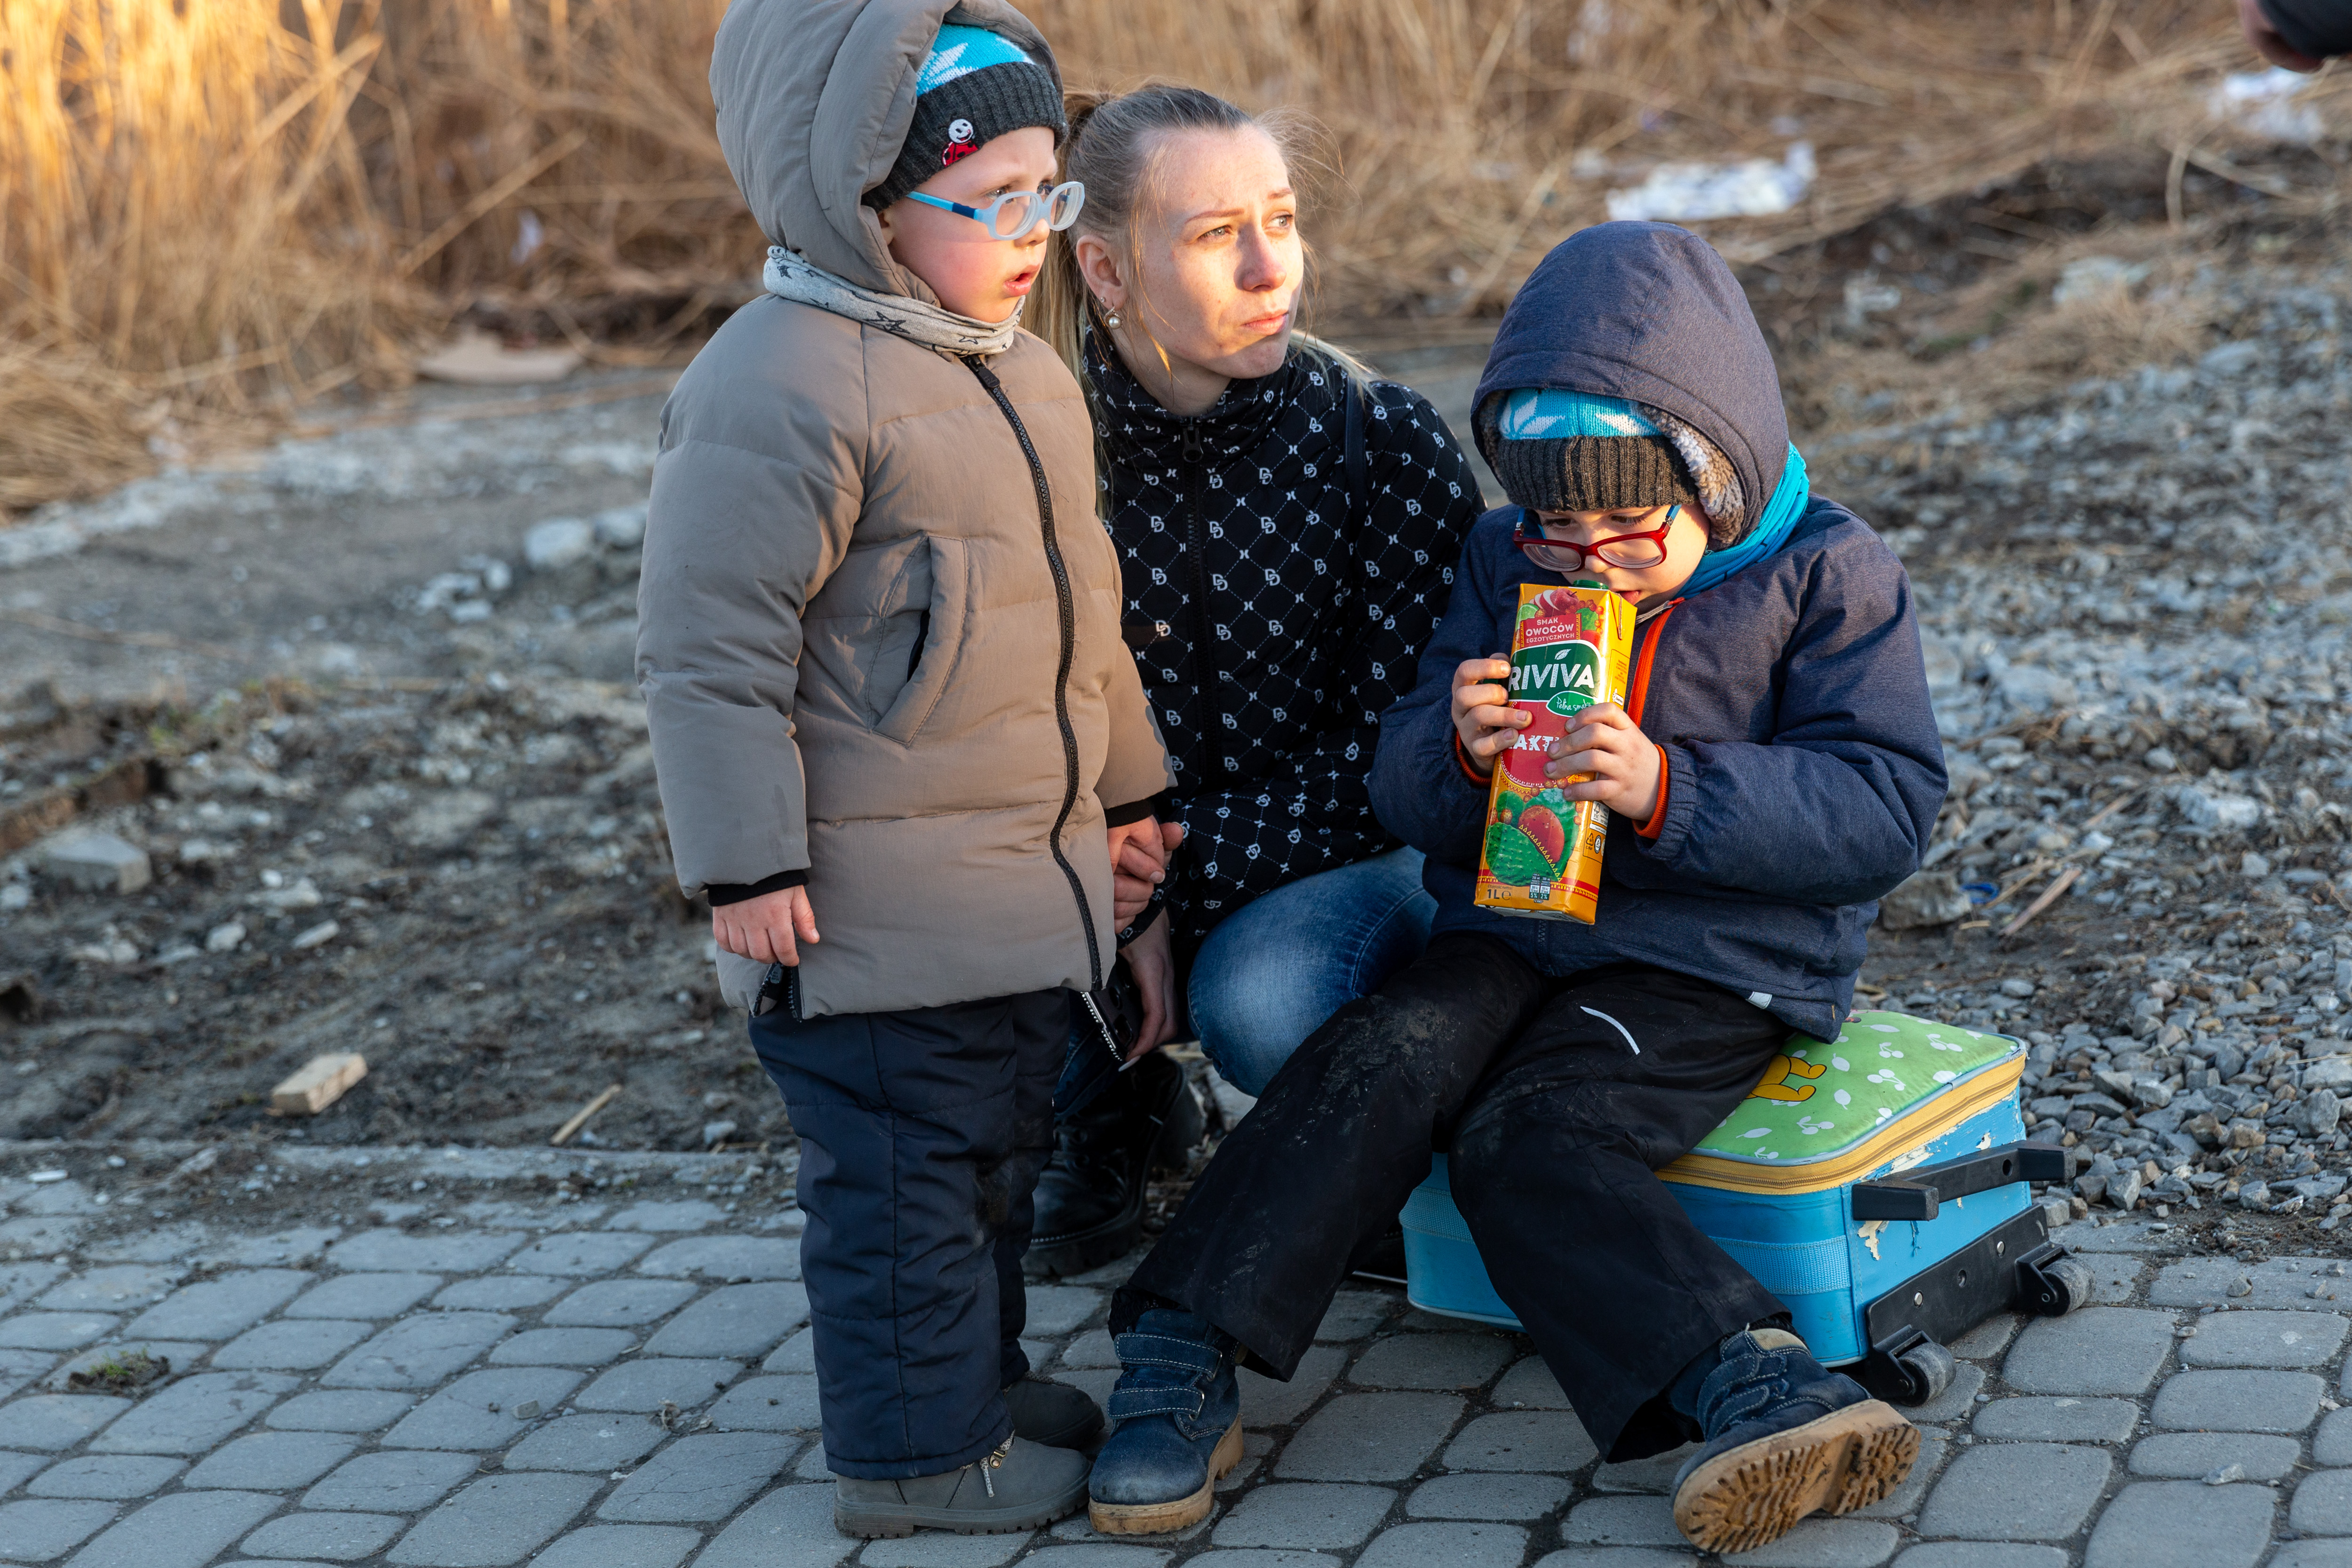 Refugees must be central to the reconstruction of Ukraine